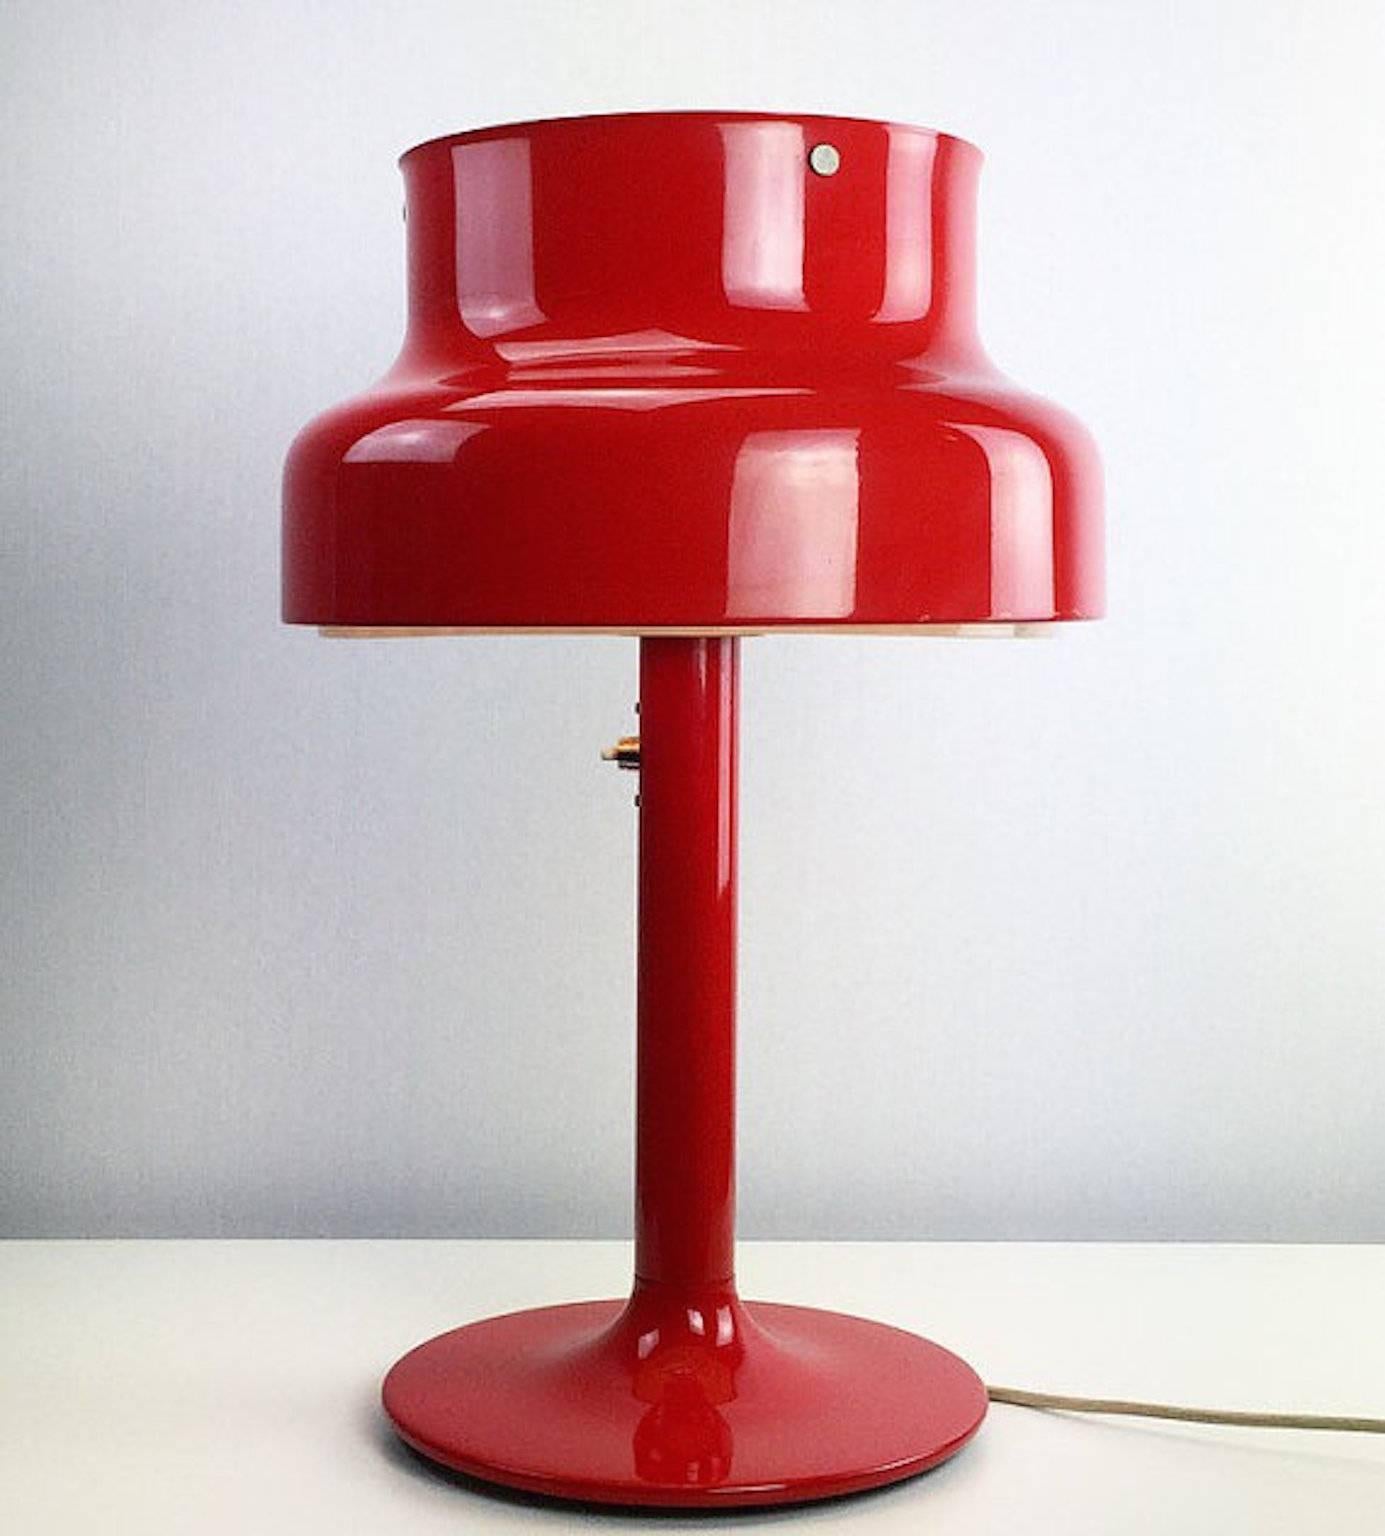 Beautiful Classic table lamp by Anders Pehrson for Atelje Lyktan AB, Sweden. Original model from the 1970s-1980s.

Bumling is considered one of most iconic light designs dating back to the Scandinavian Mid-Century period.

This particular model